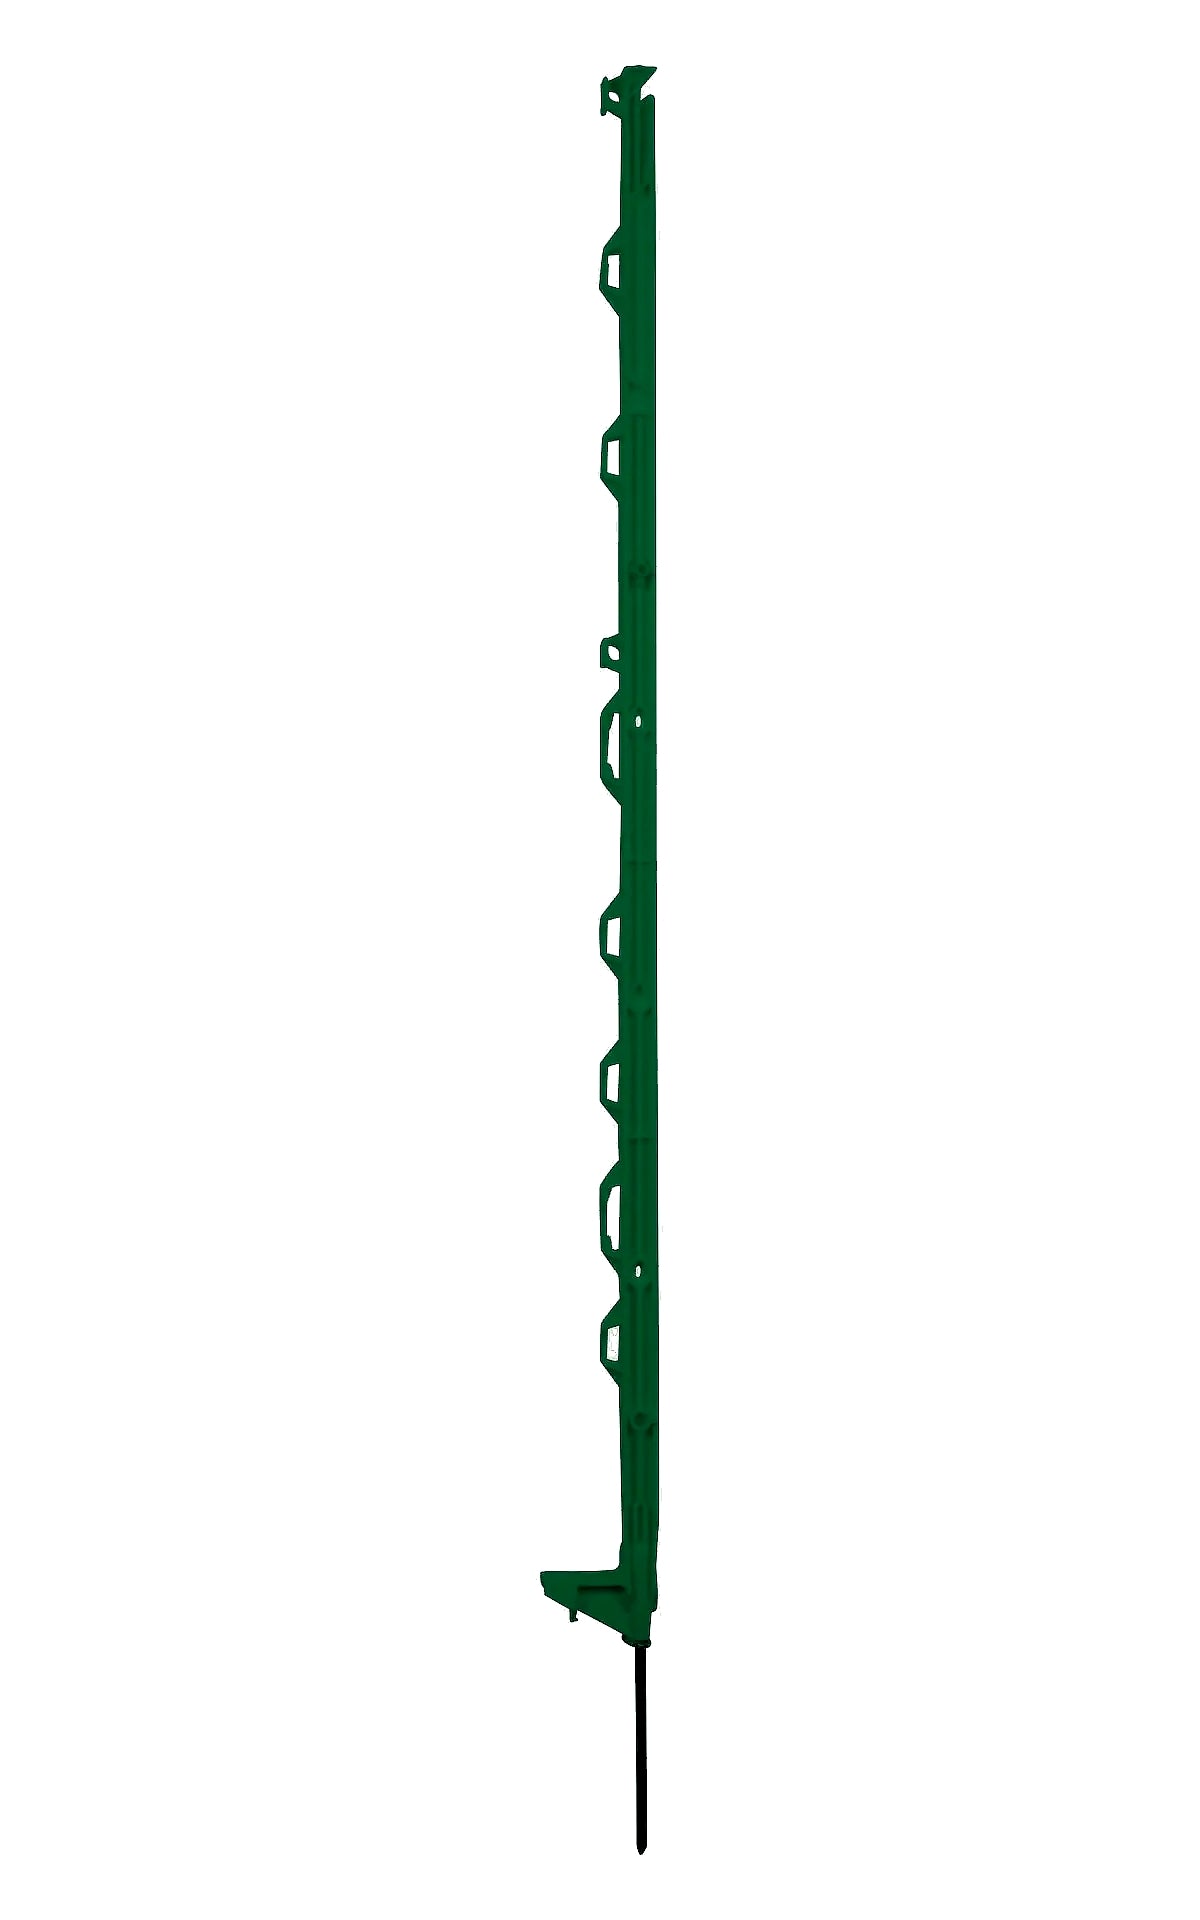 Hotline - Green Plastic Multiwire Electric Fence Posts 104cm - (10 Pack)